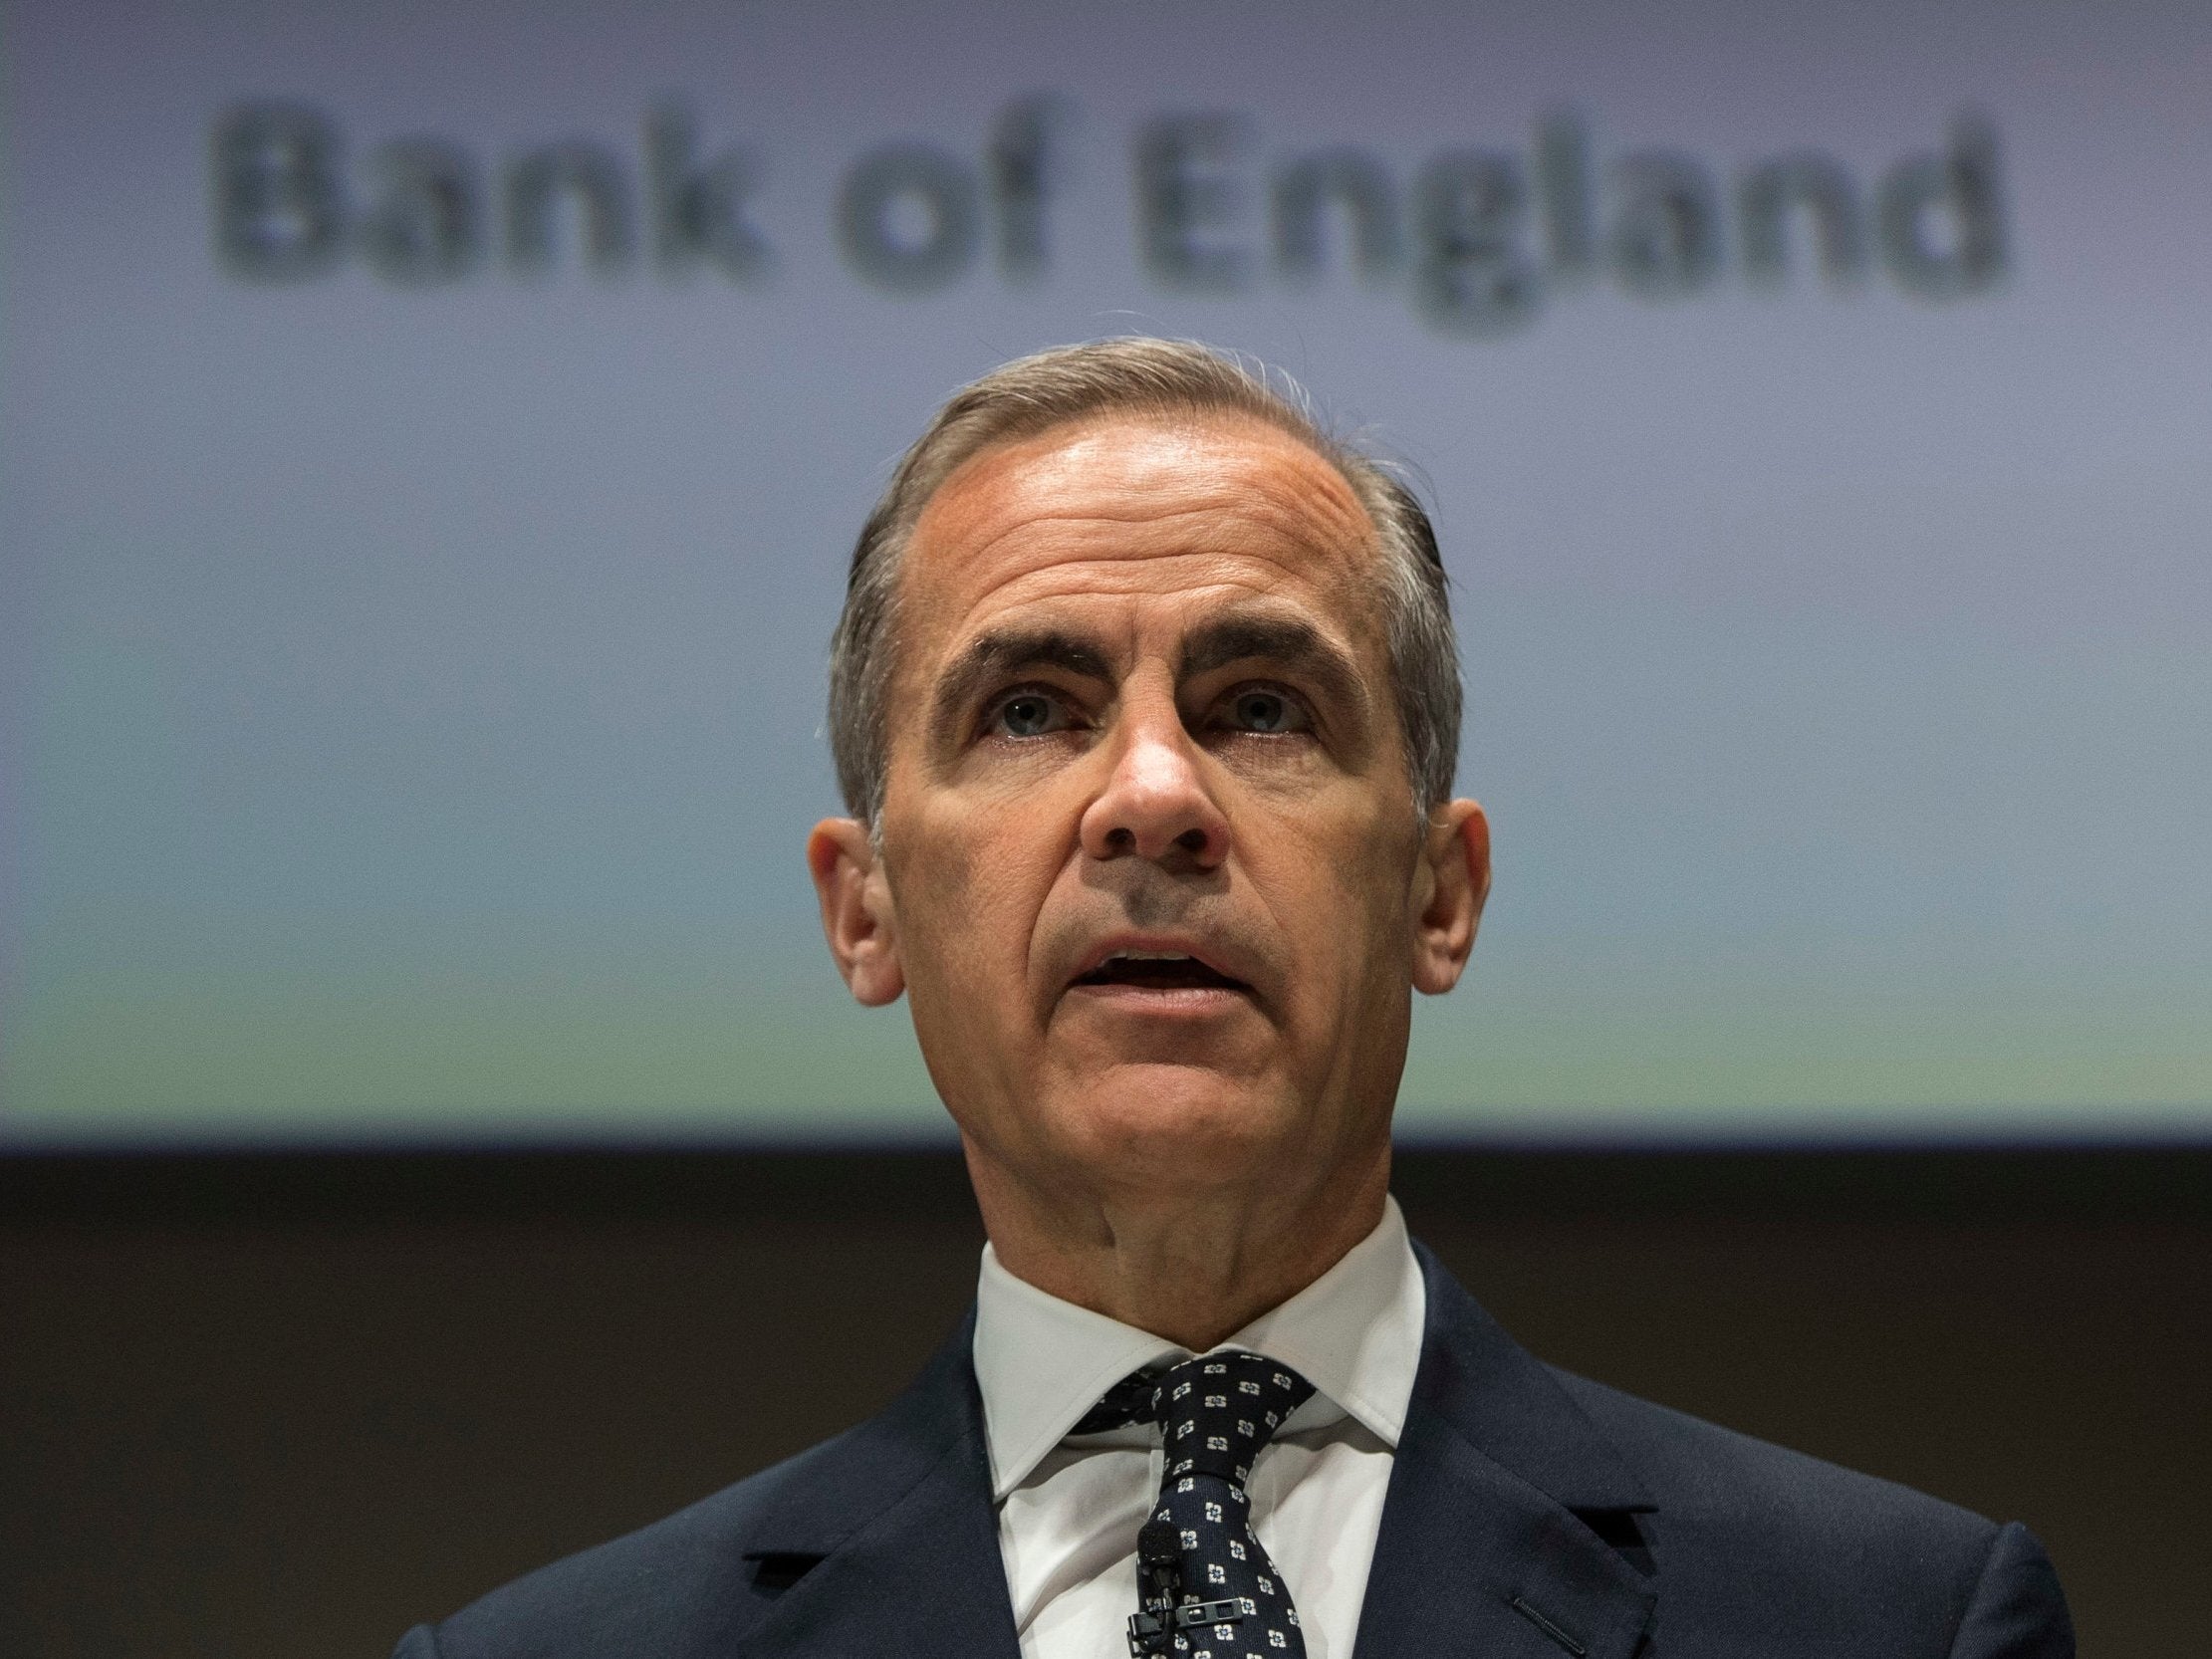 ‘Brexit can lead to a new form of international cooperation,’ Carney said